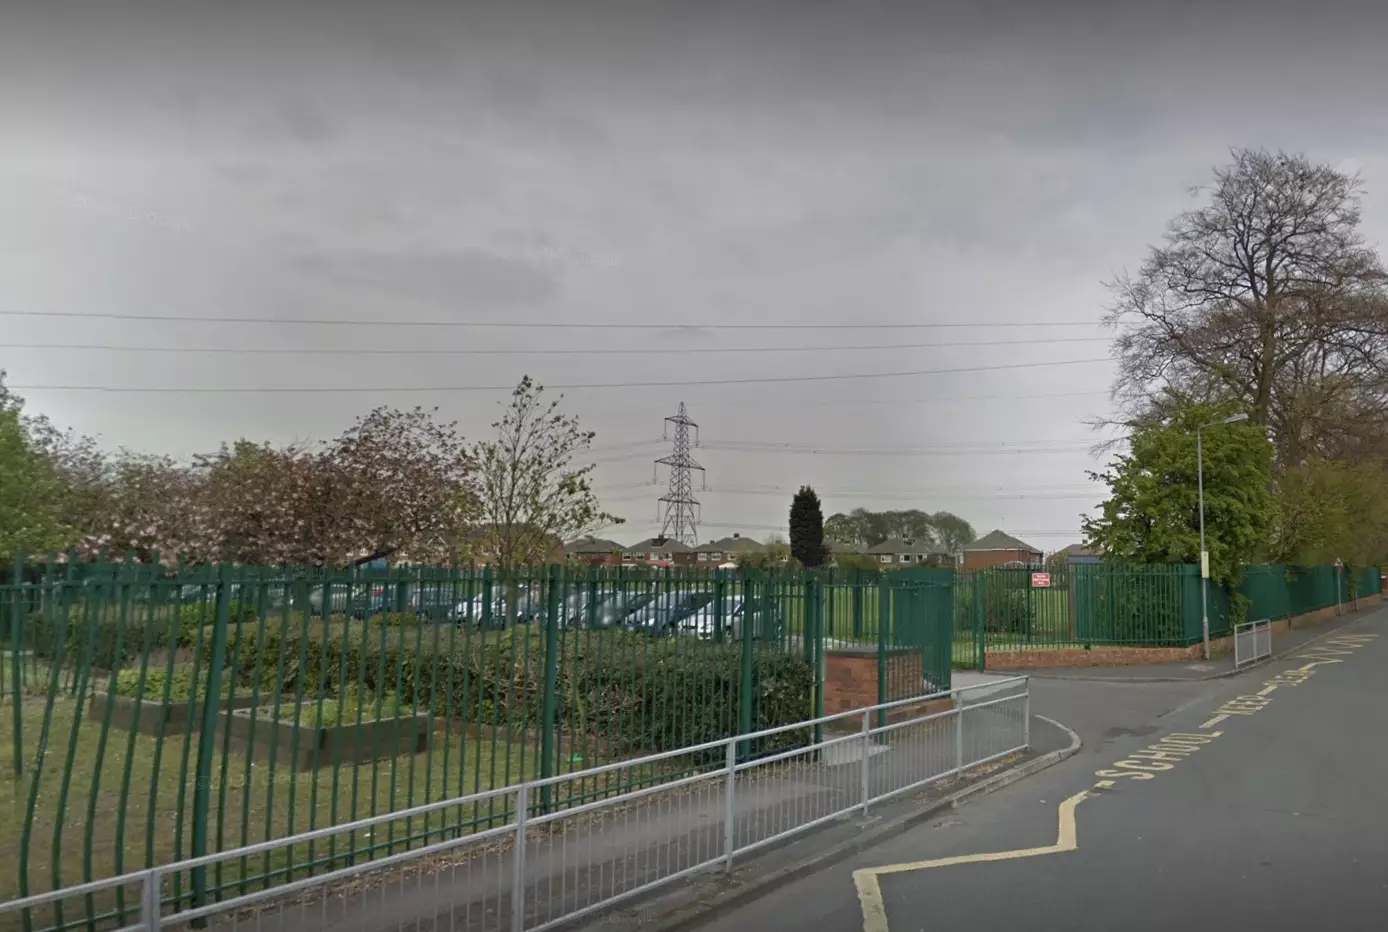 St Bartholomew's School in Rainhill, nearby where the car was parked.